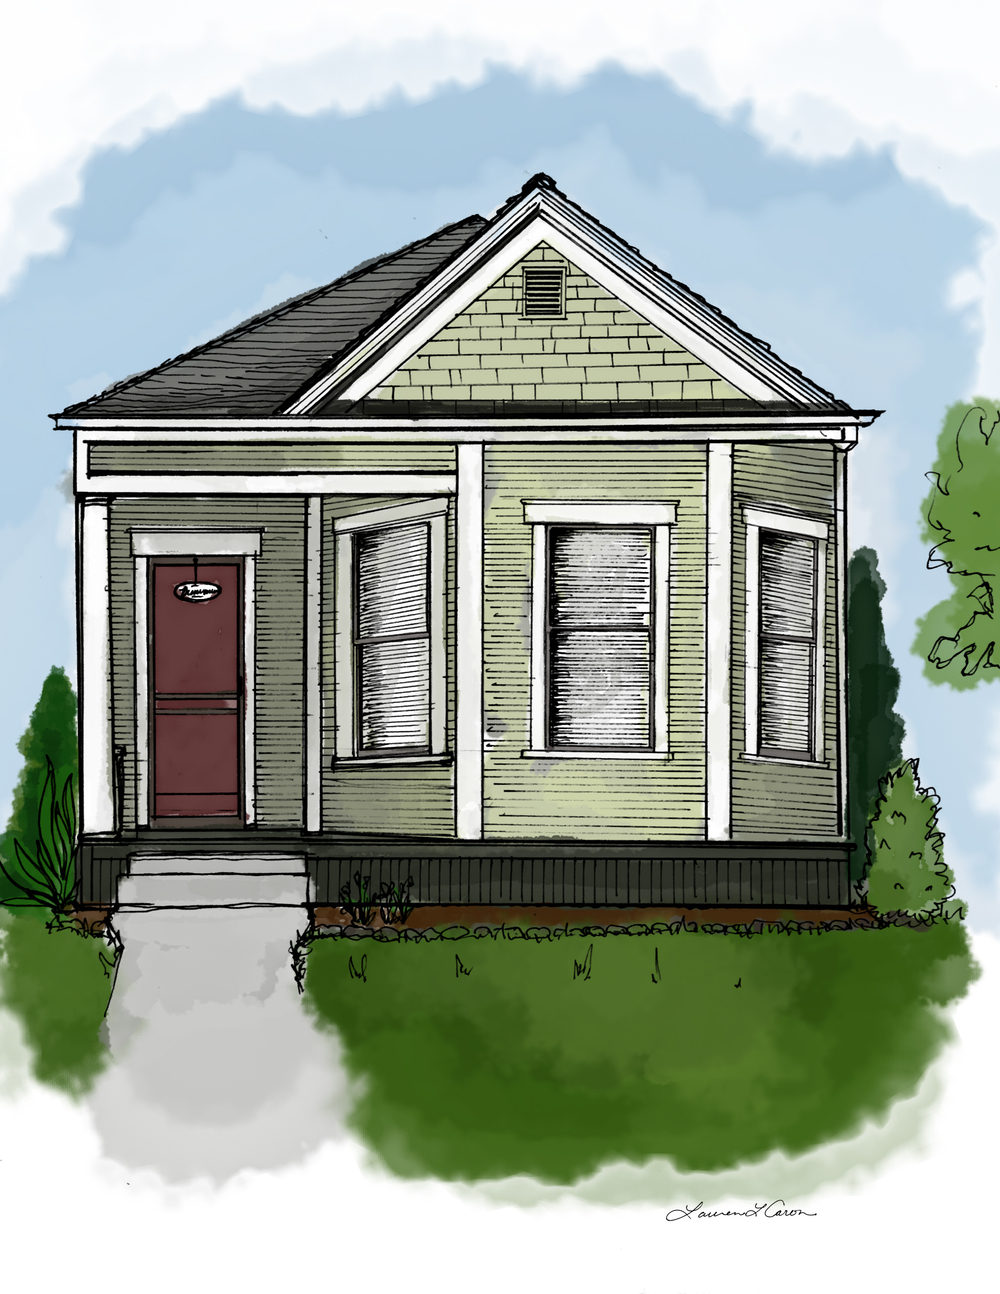 A sketch of our little house that I did this week when I couldn't be productive doing other work.&nbsp;